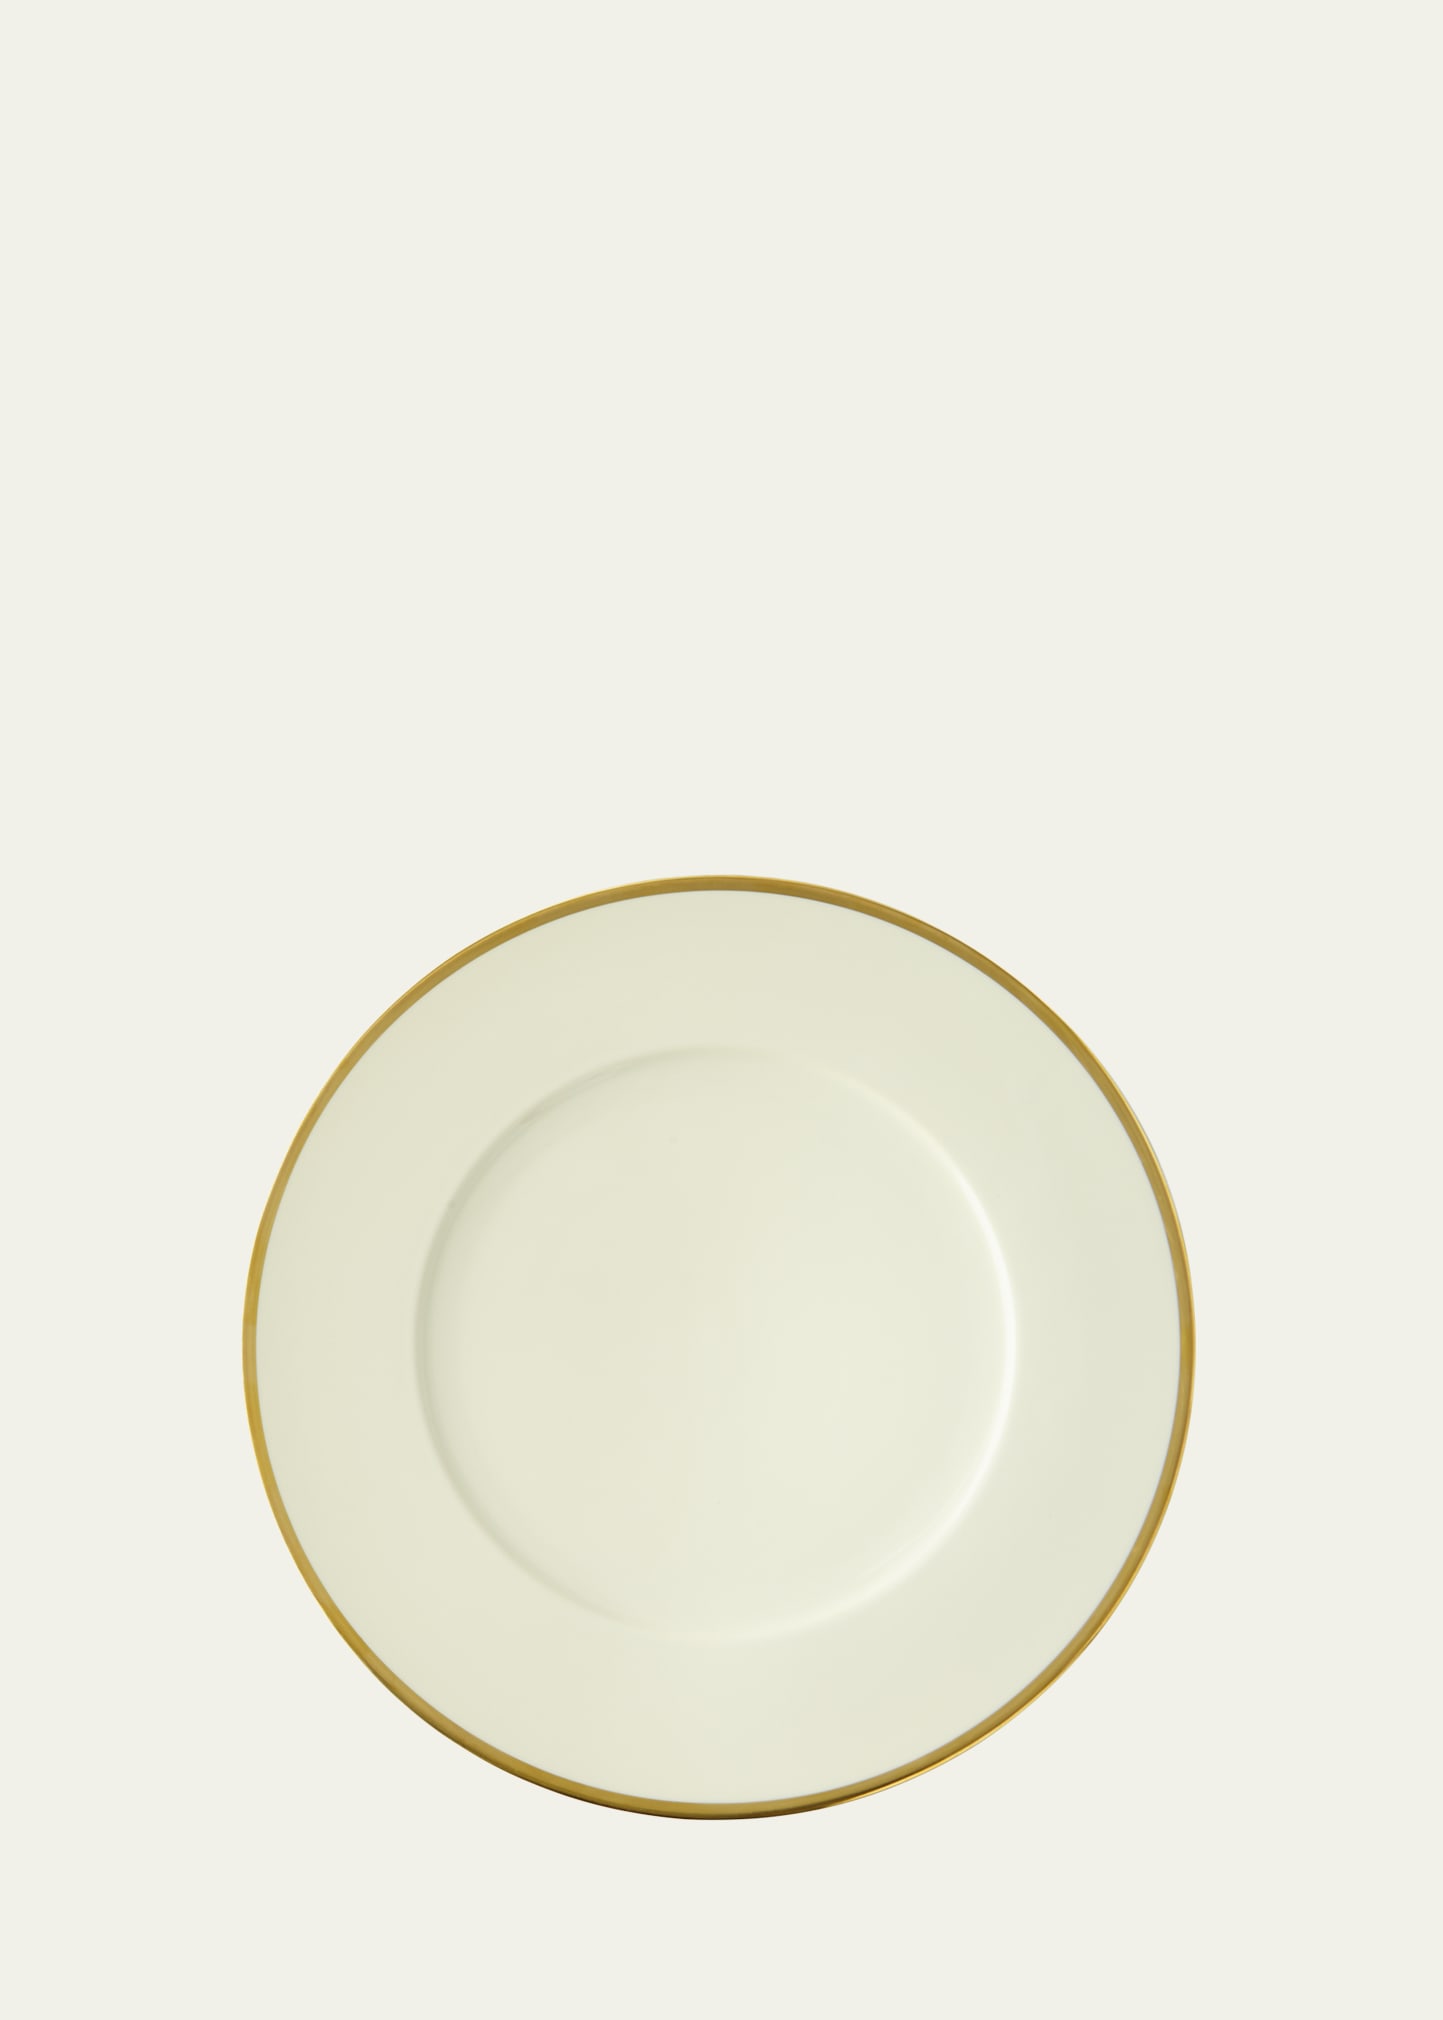 Anna Weatherley Porcelain And 24k Gold Charger In Neutral